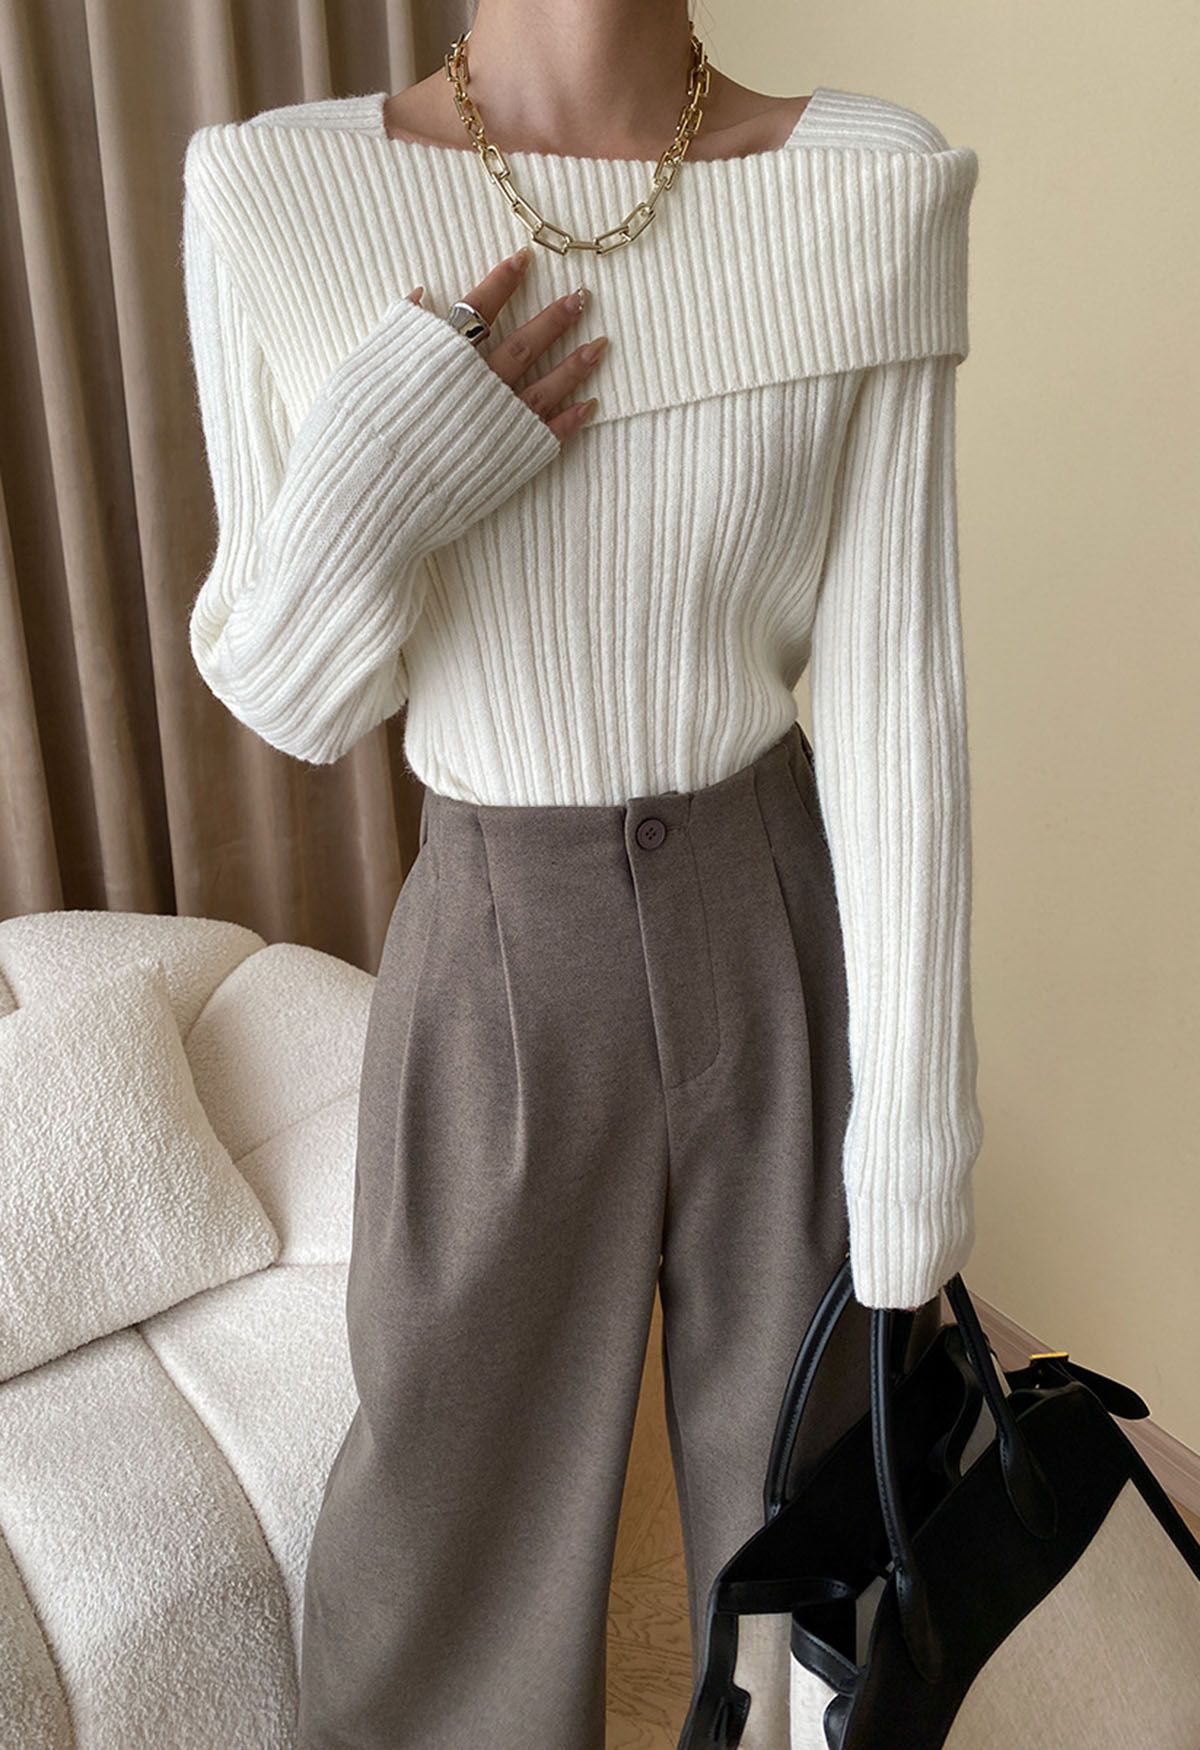 Asymmetric Flap Ribbed Knit Sweater in Cream